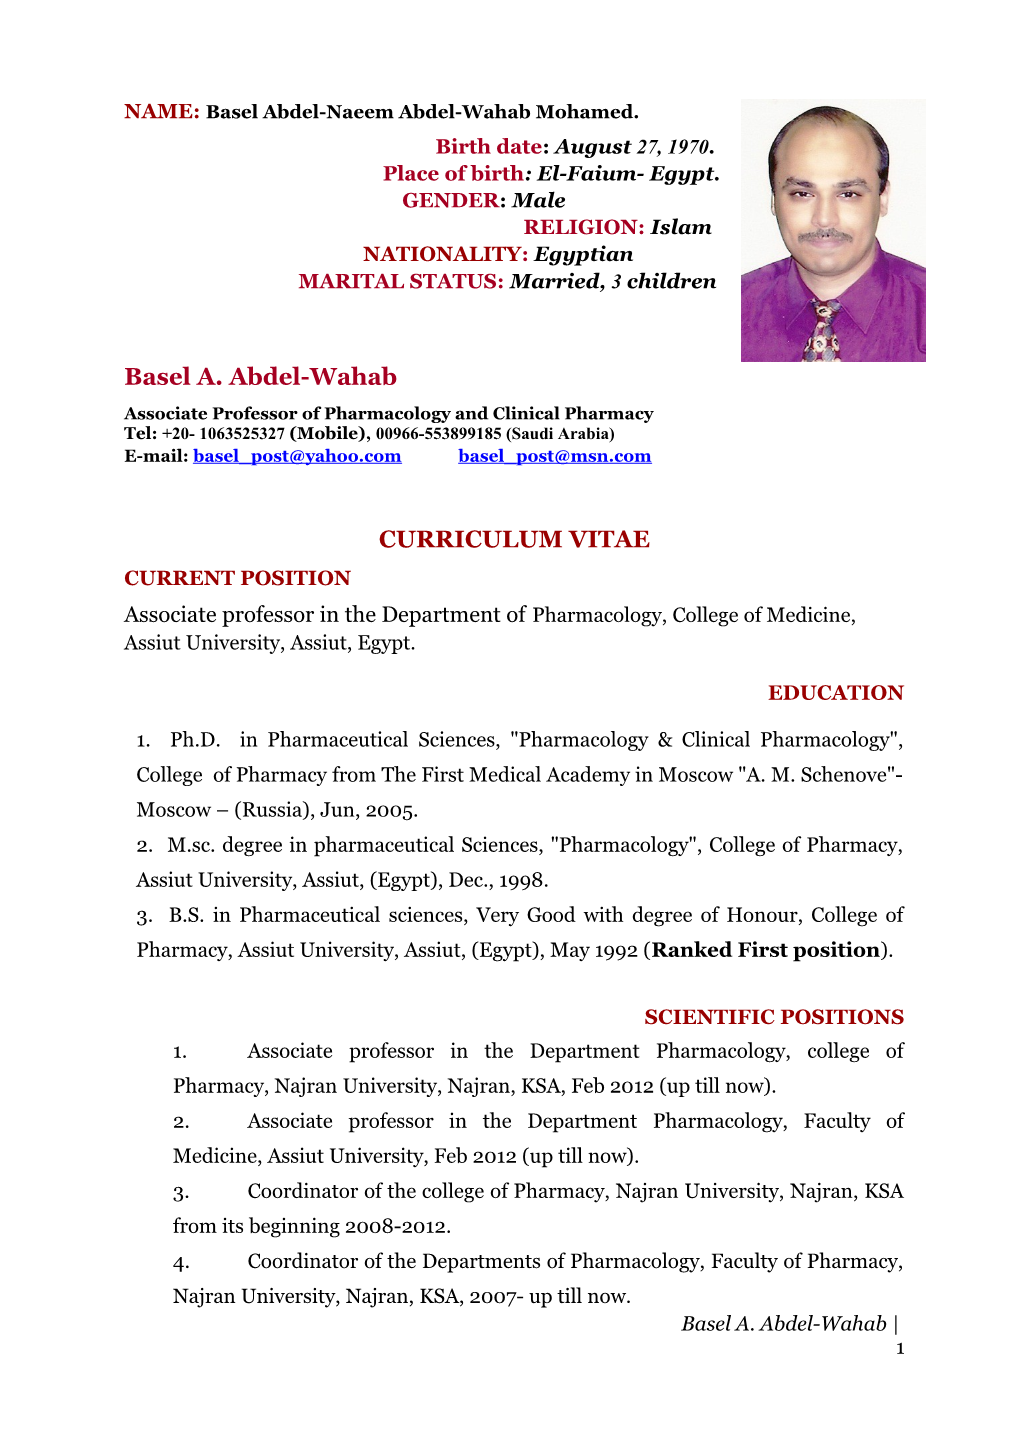 Associate Professor of Pharmacology and Clinical Pharmacy